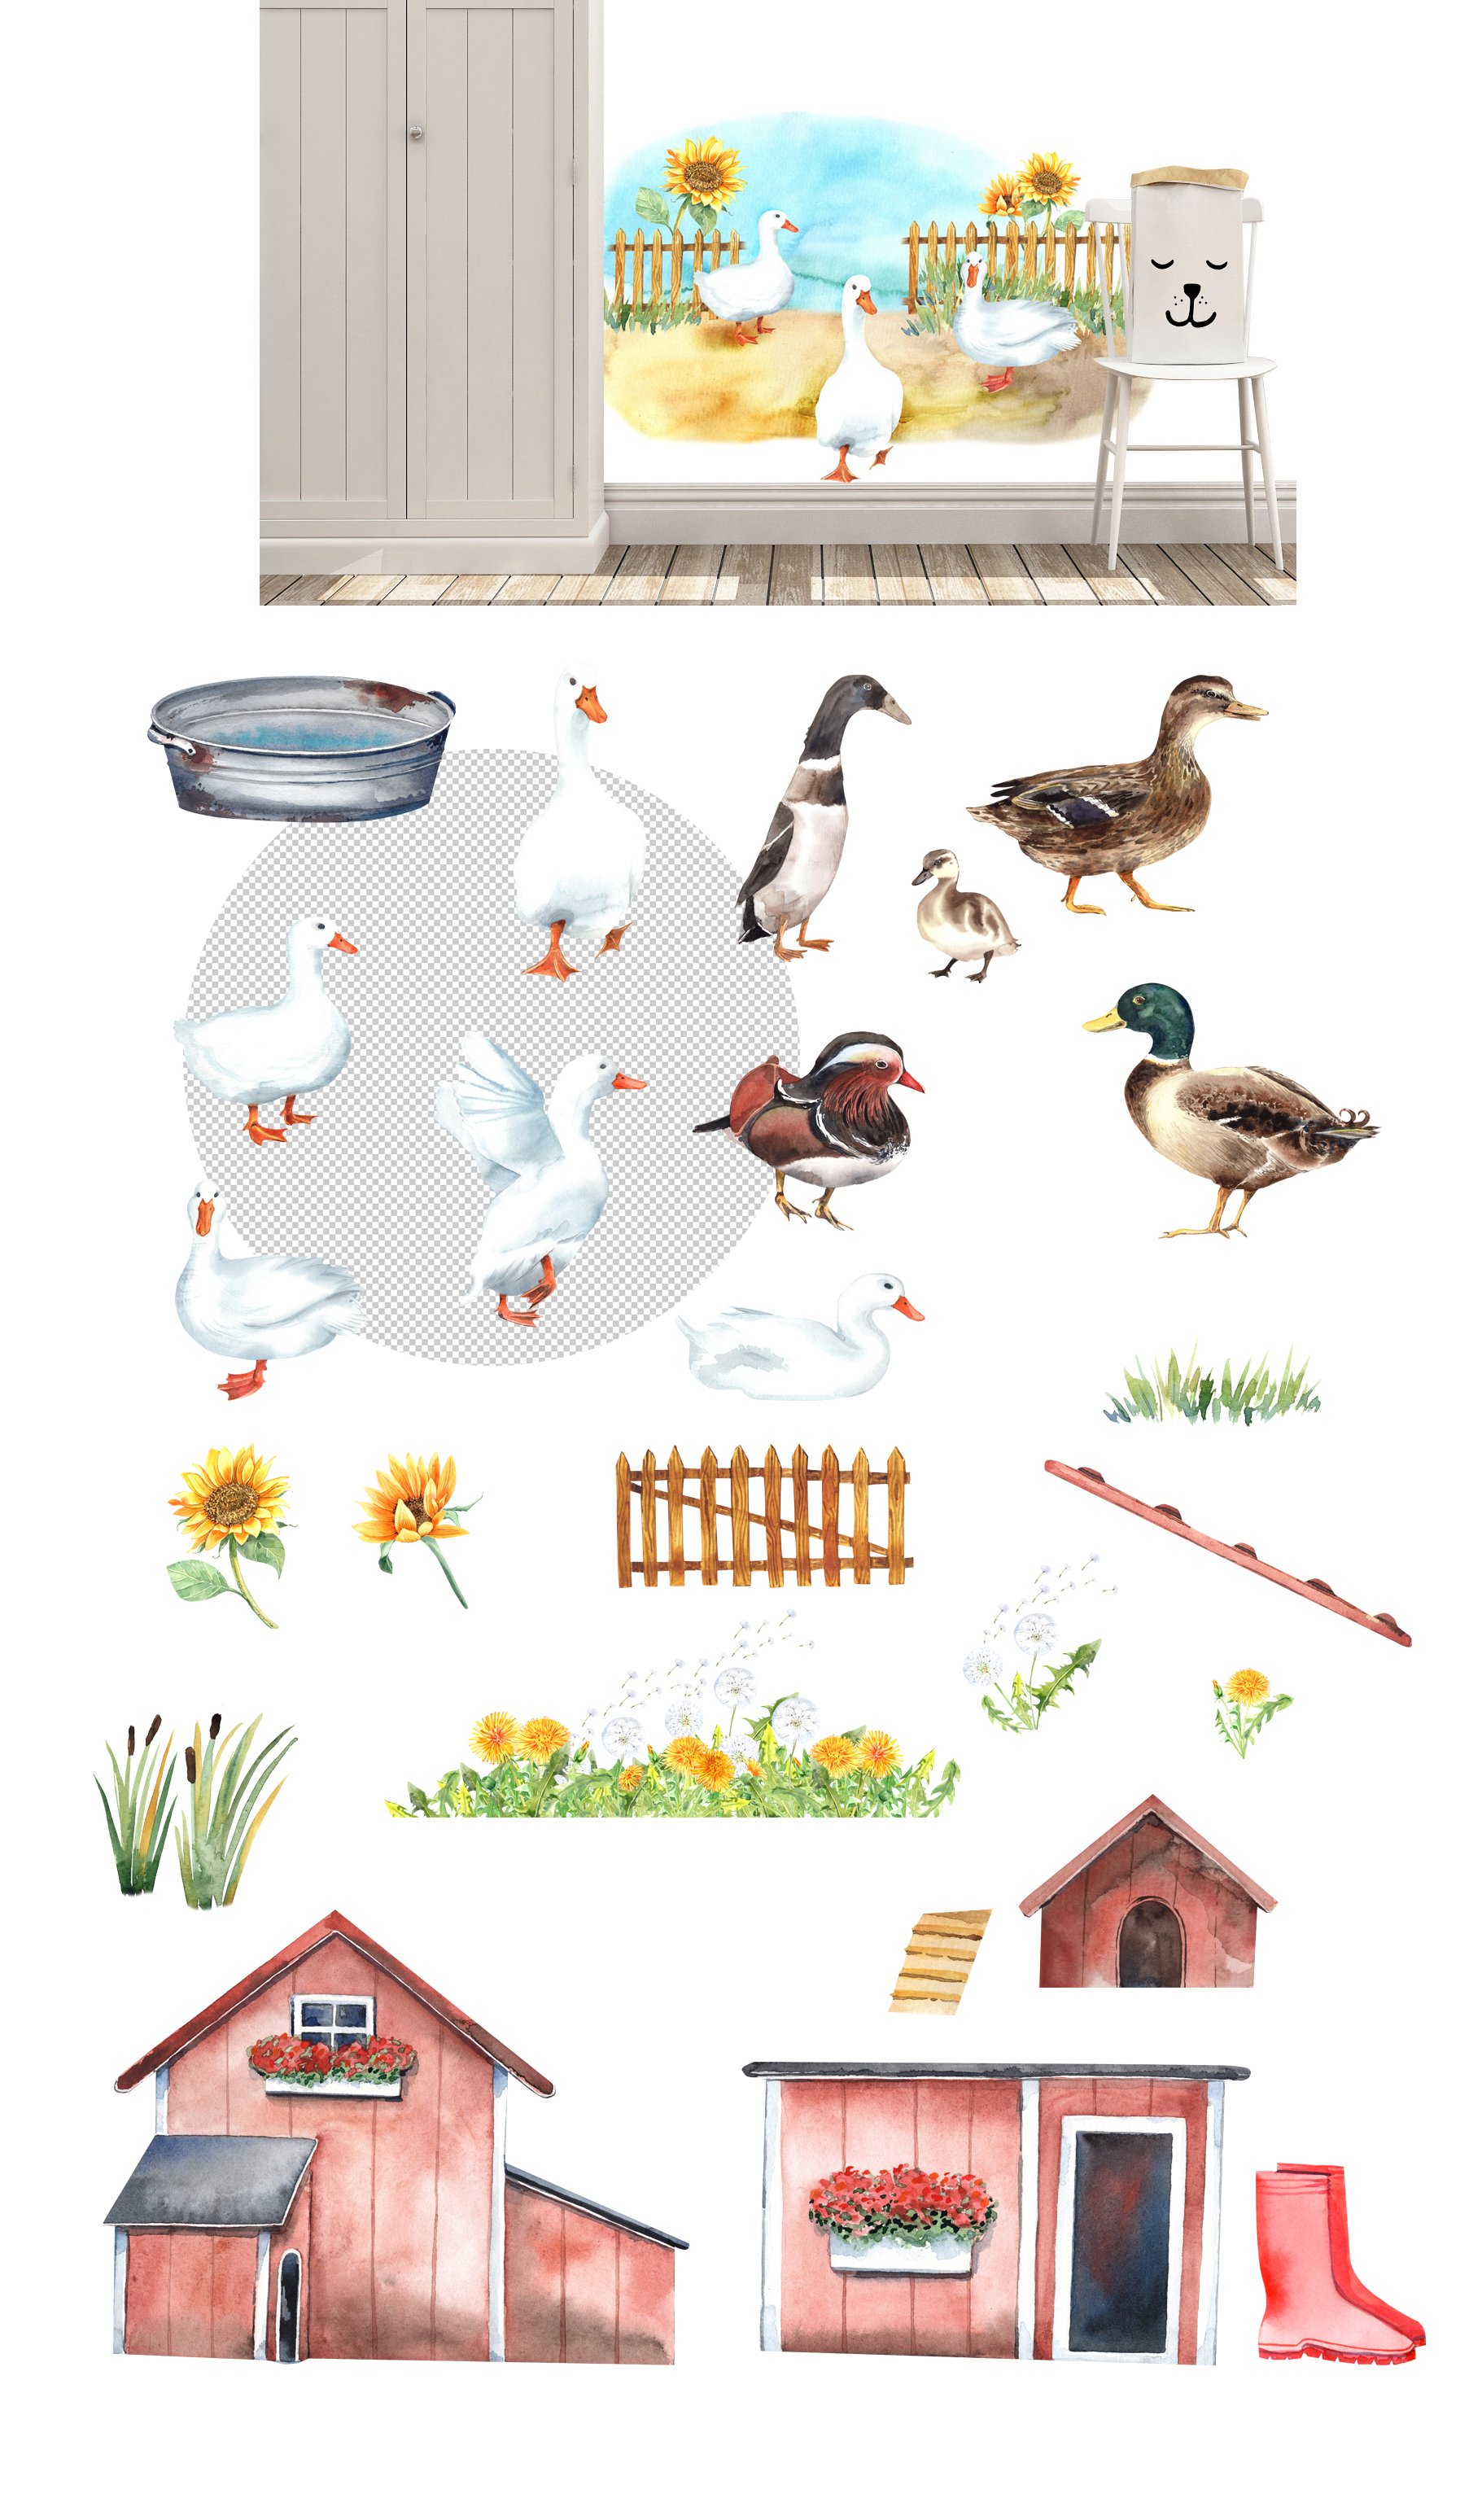 Duck village preview image.